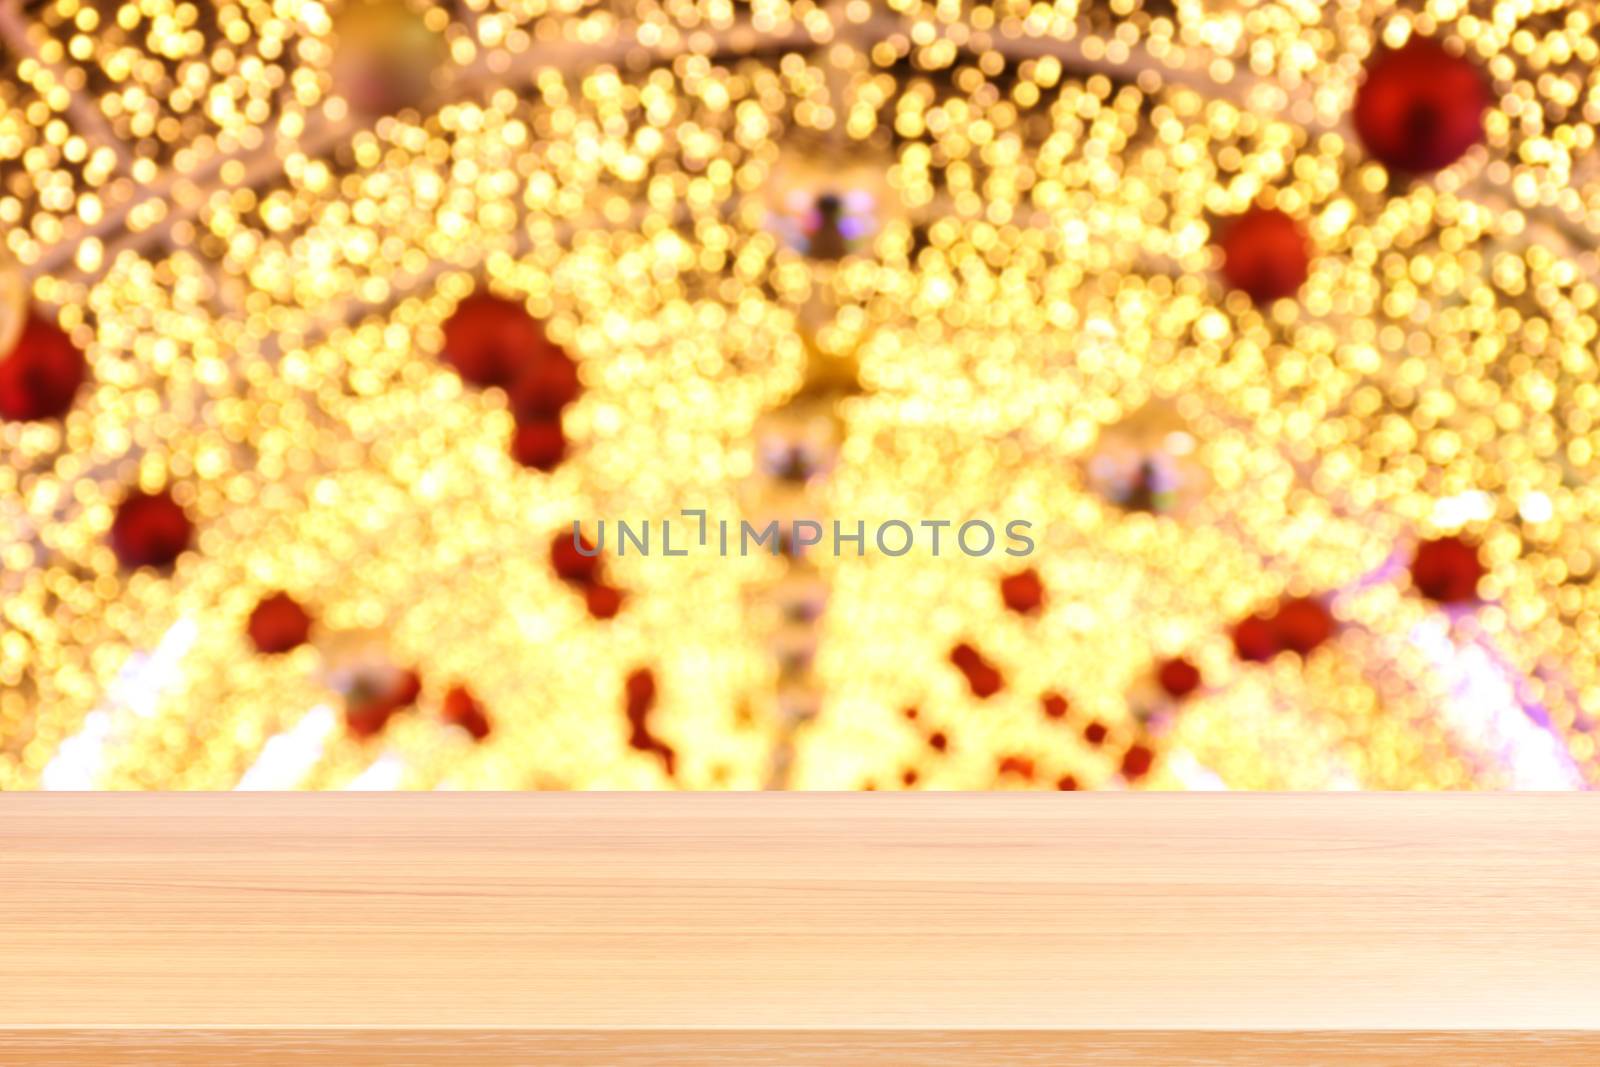 wood plank on arch bokeh golden yellow colorful background, empty wood table floors on door facade bokeh glitter light gold luxury, wood table board empty front arched entrance glittering gold light by cgdeaw